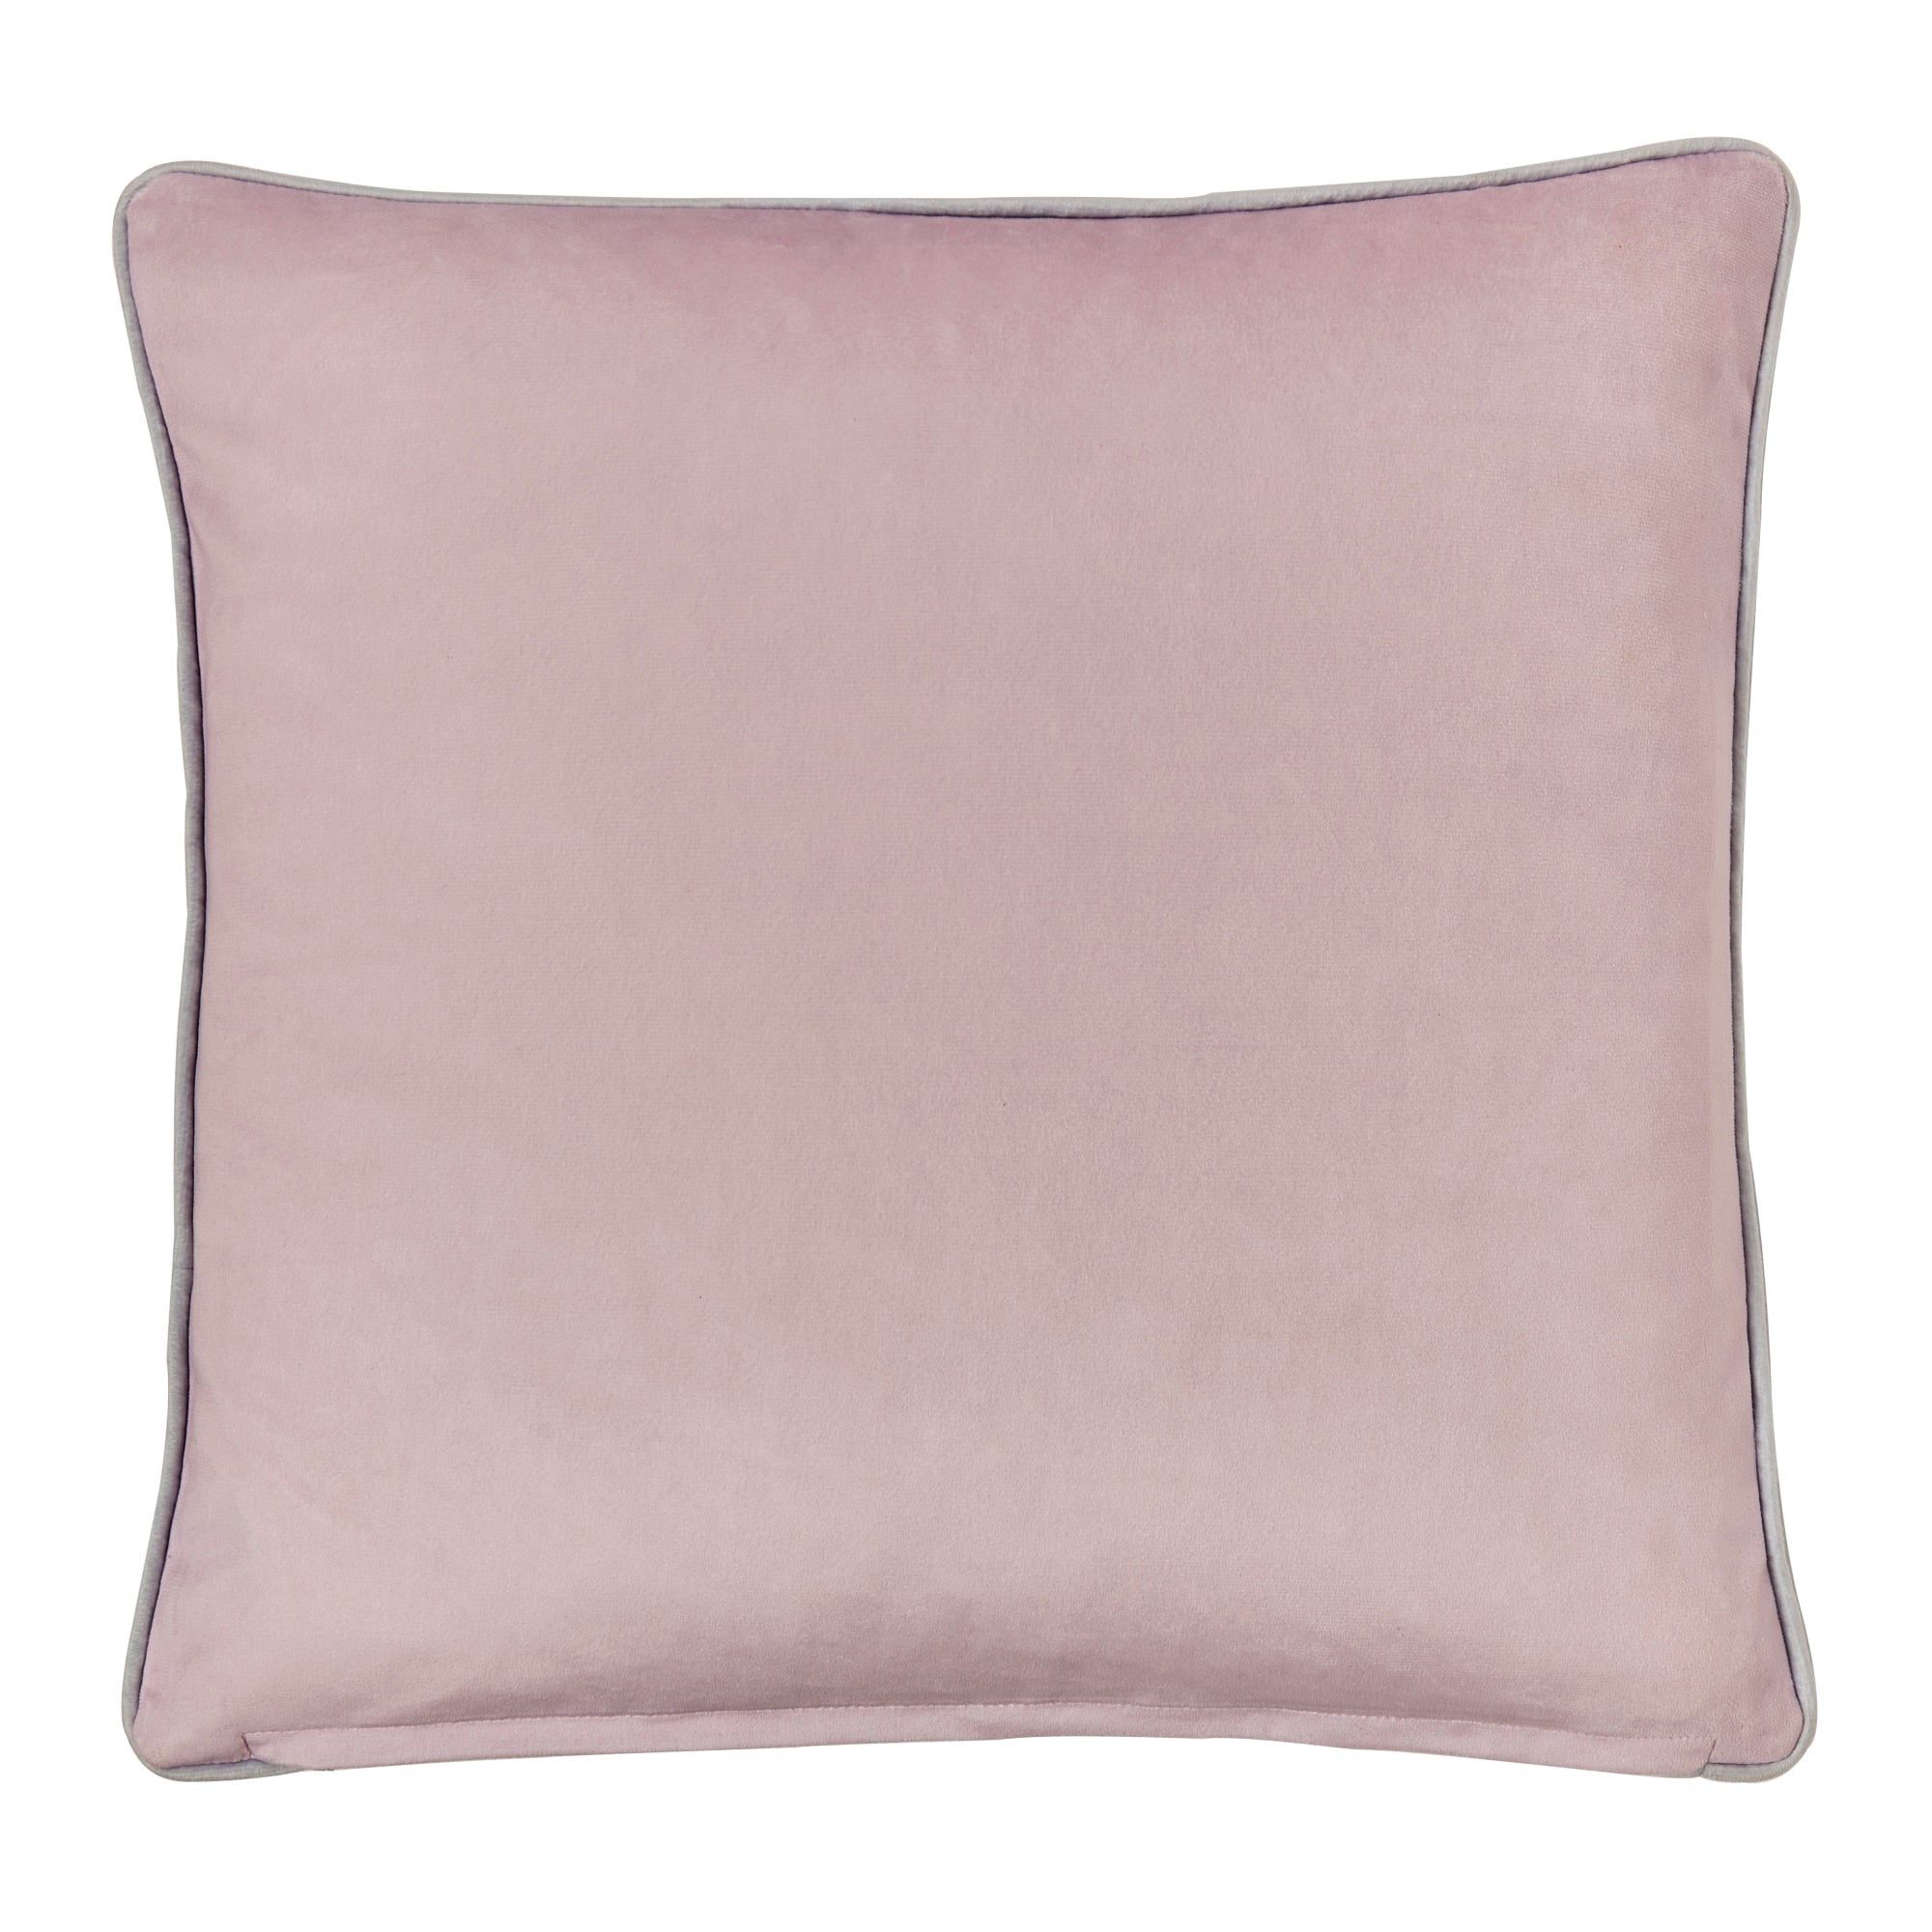 Alma Filled Cushion by Fusion in Lilac 43 x 43cm - Filled Cushion - Fusion